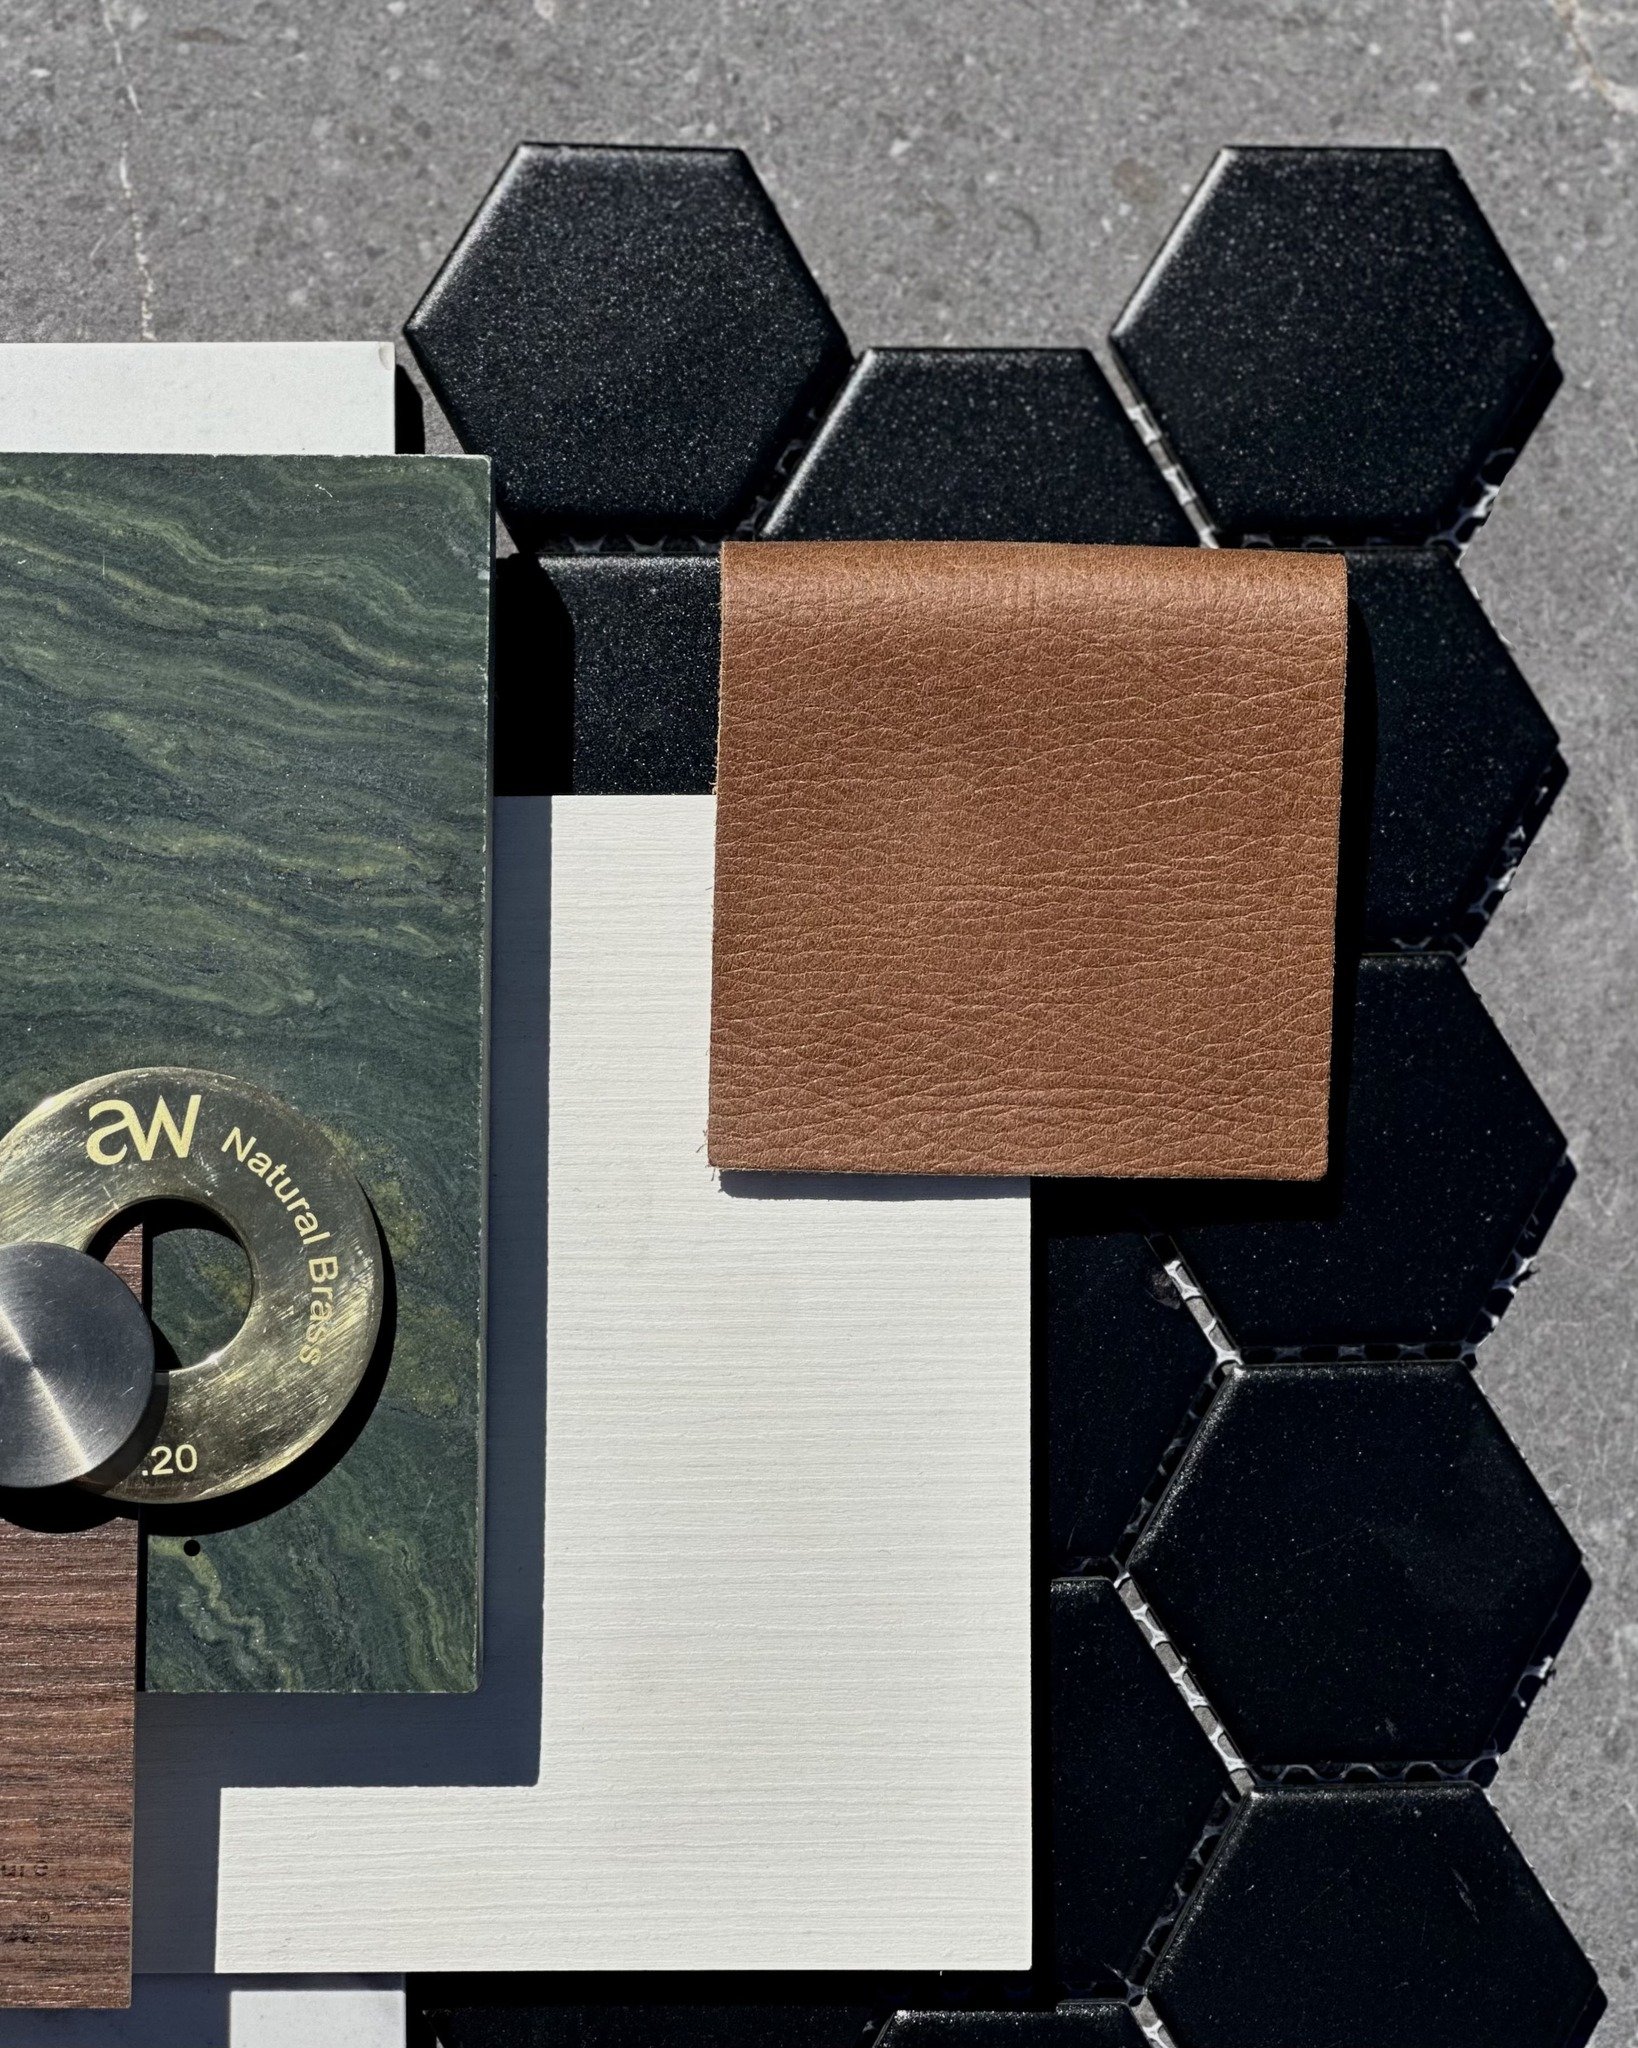 Enhance your bathroom with texture and style! 
We love to use mood boards to showcase different design styles with Italia Ceramics tiles. 
Featuring our Black Hex Mosaic tile and Bellisimo marble look tile.

#italiaceramics #flatlay #tiles